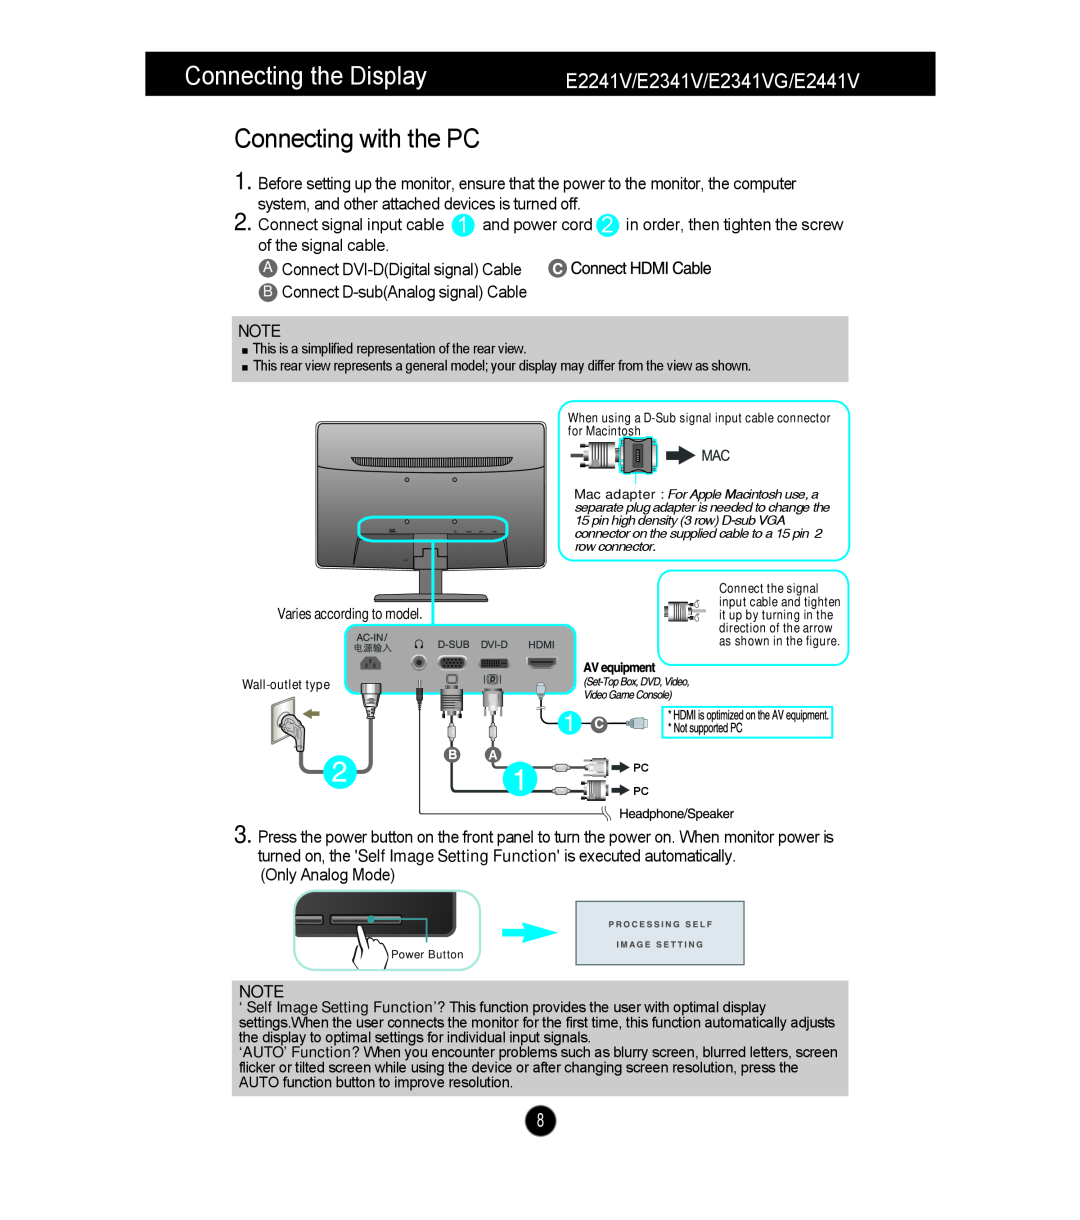 LG Electronics manual Connecting with the PC, Connecting the Display, E2241V/E2341V/E2341VG/E2441V, Only Analog Mode 